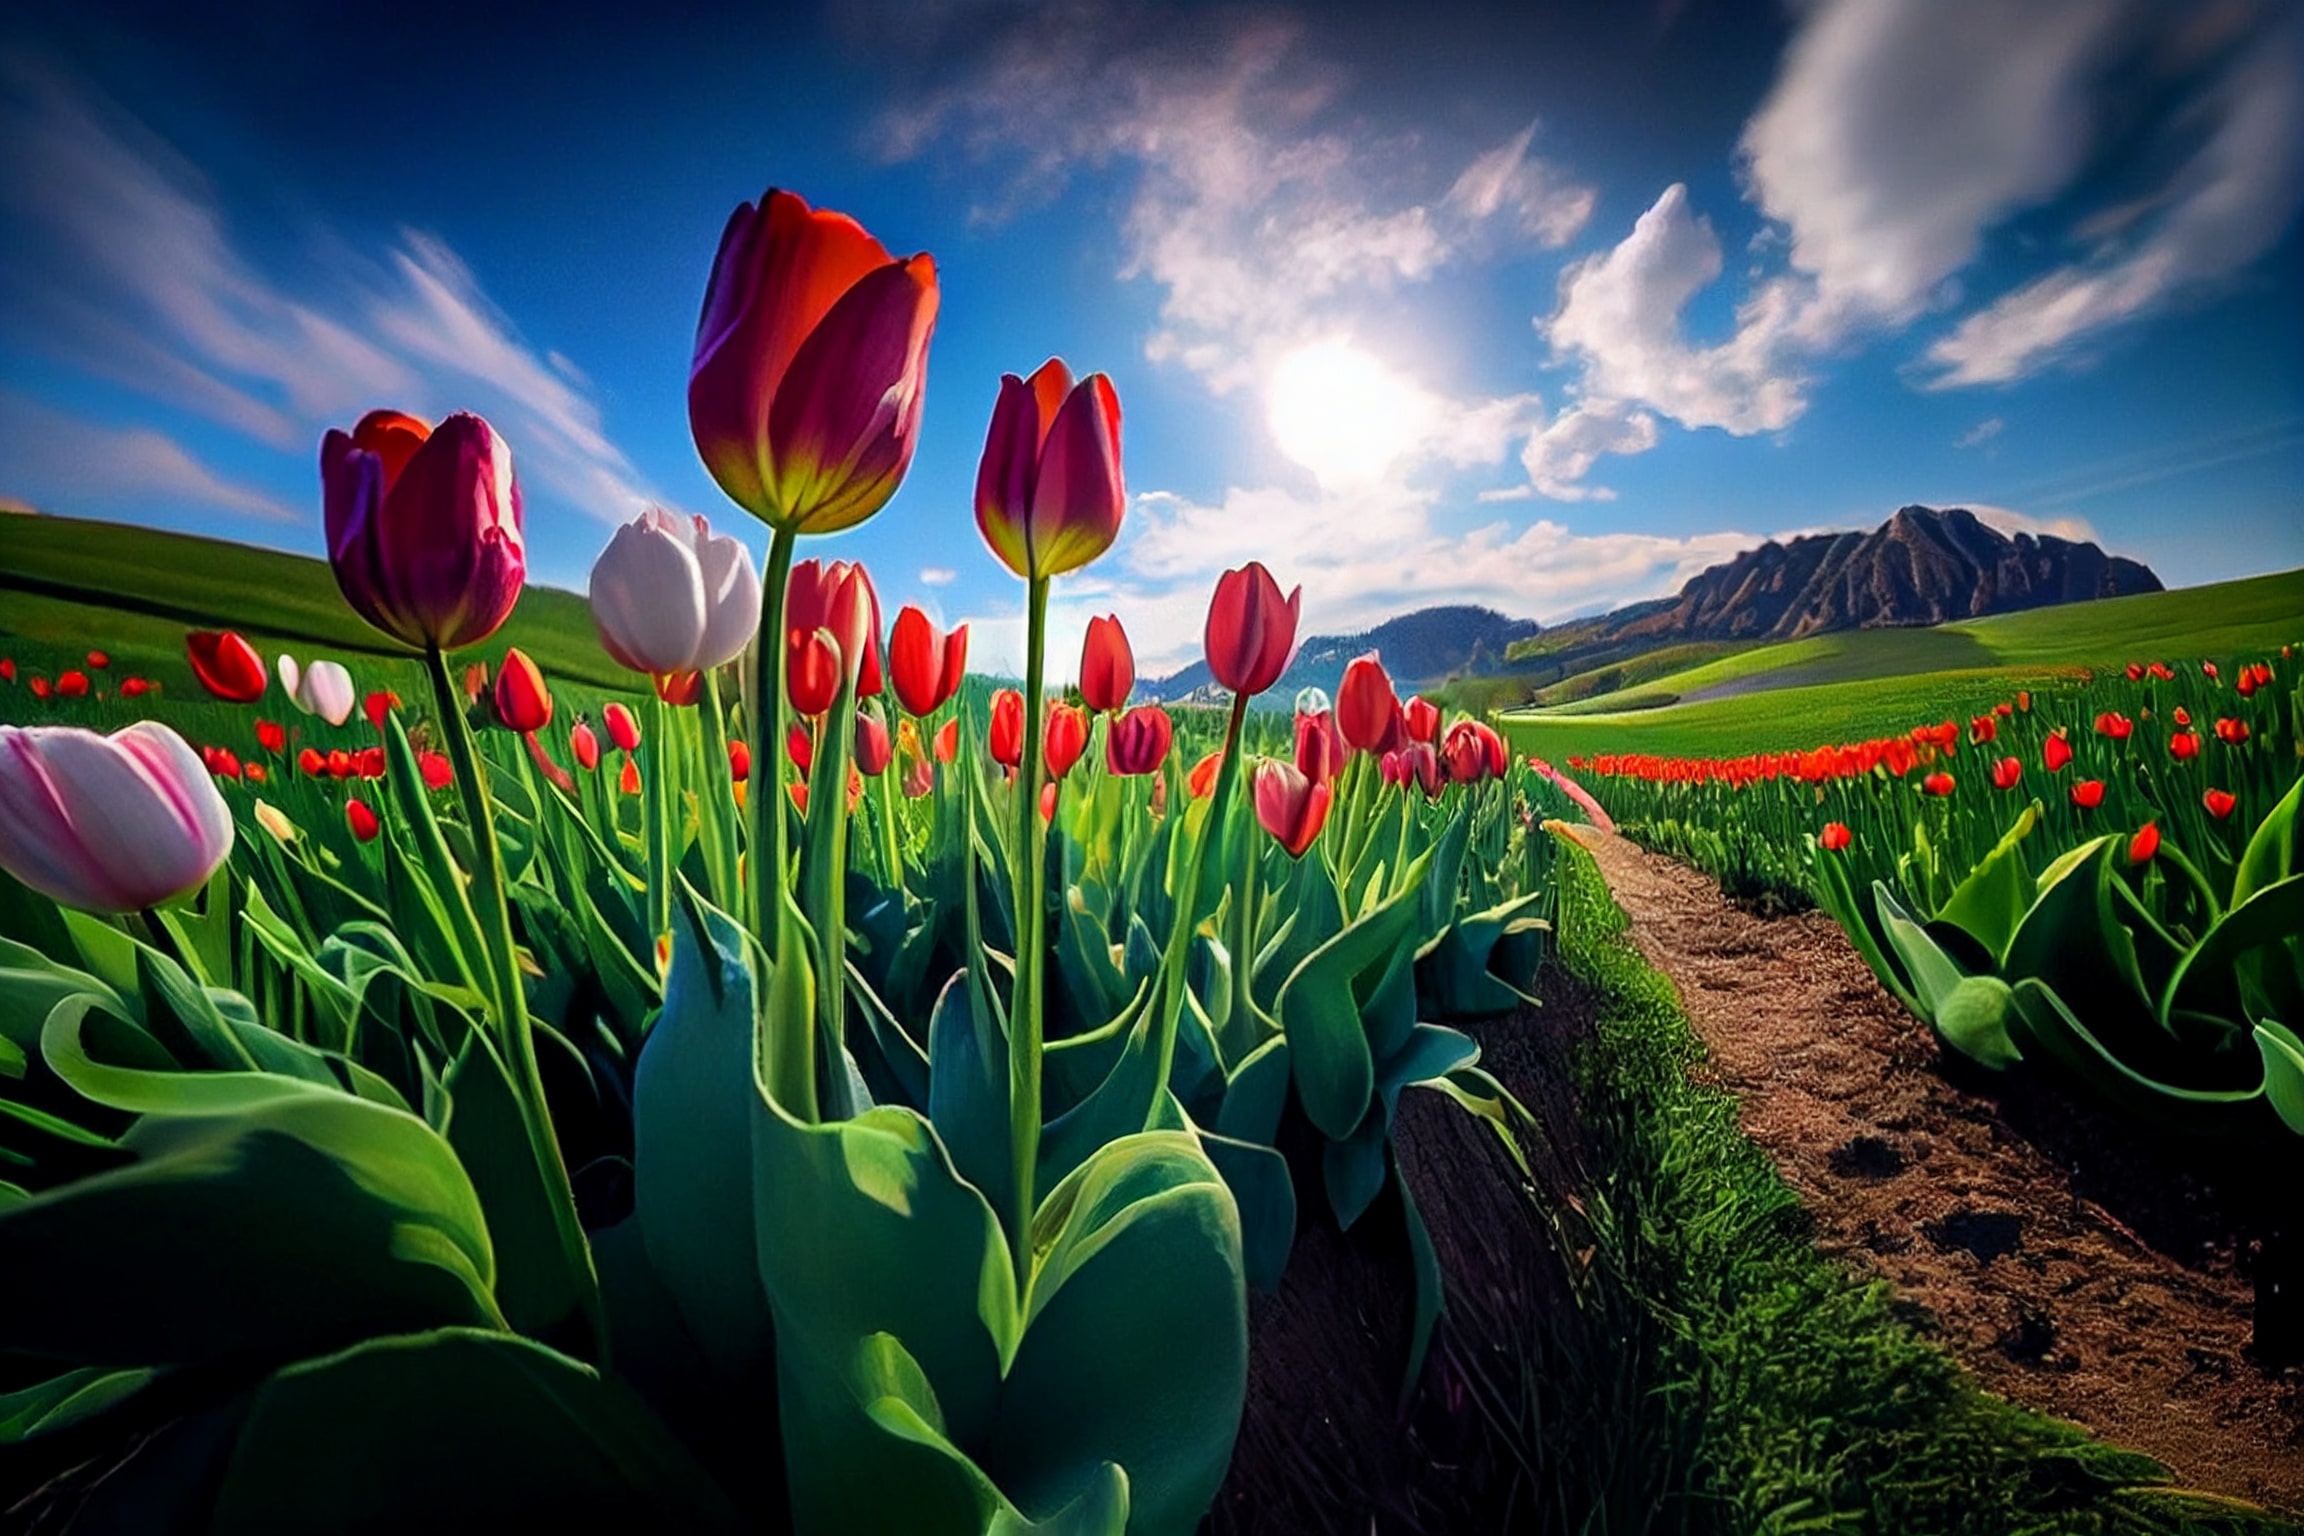 Field of tulips with a dirt path in the foreground.